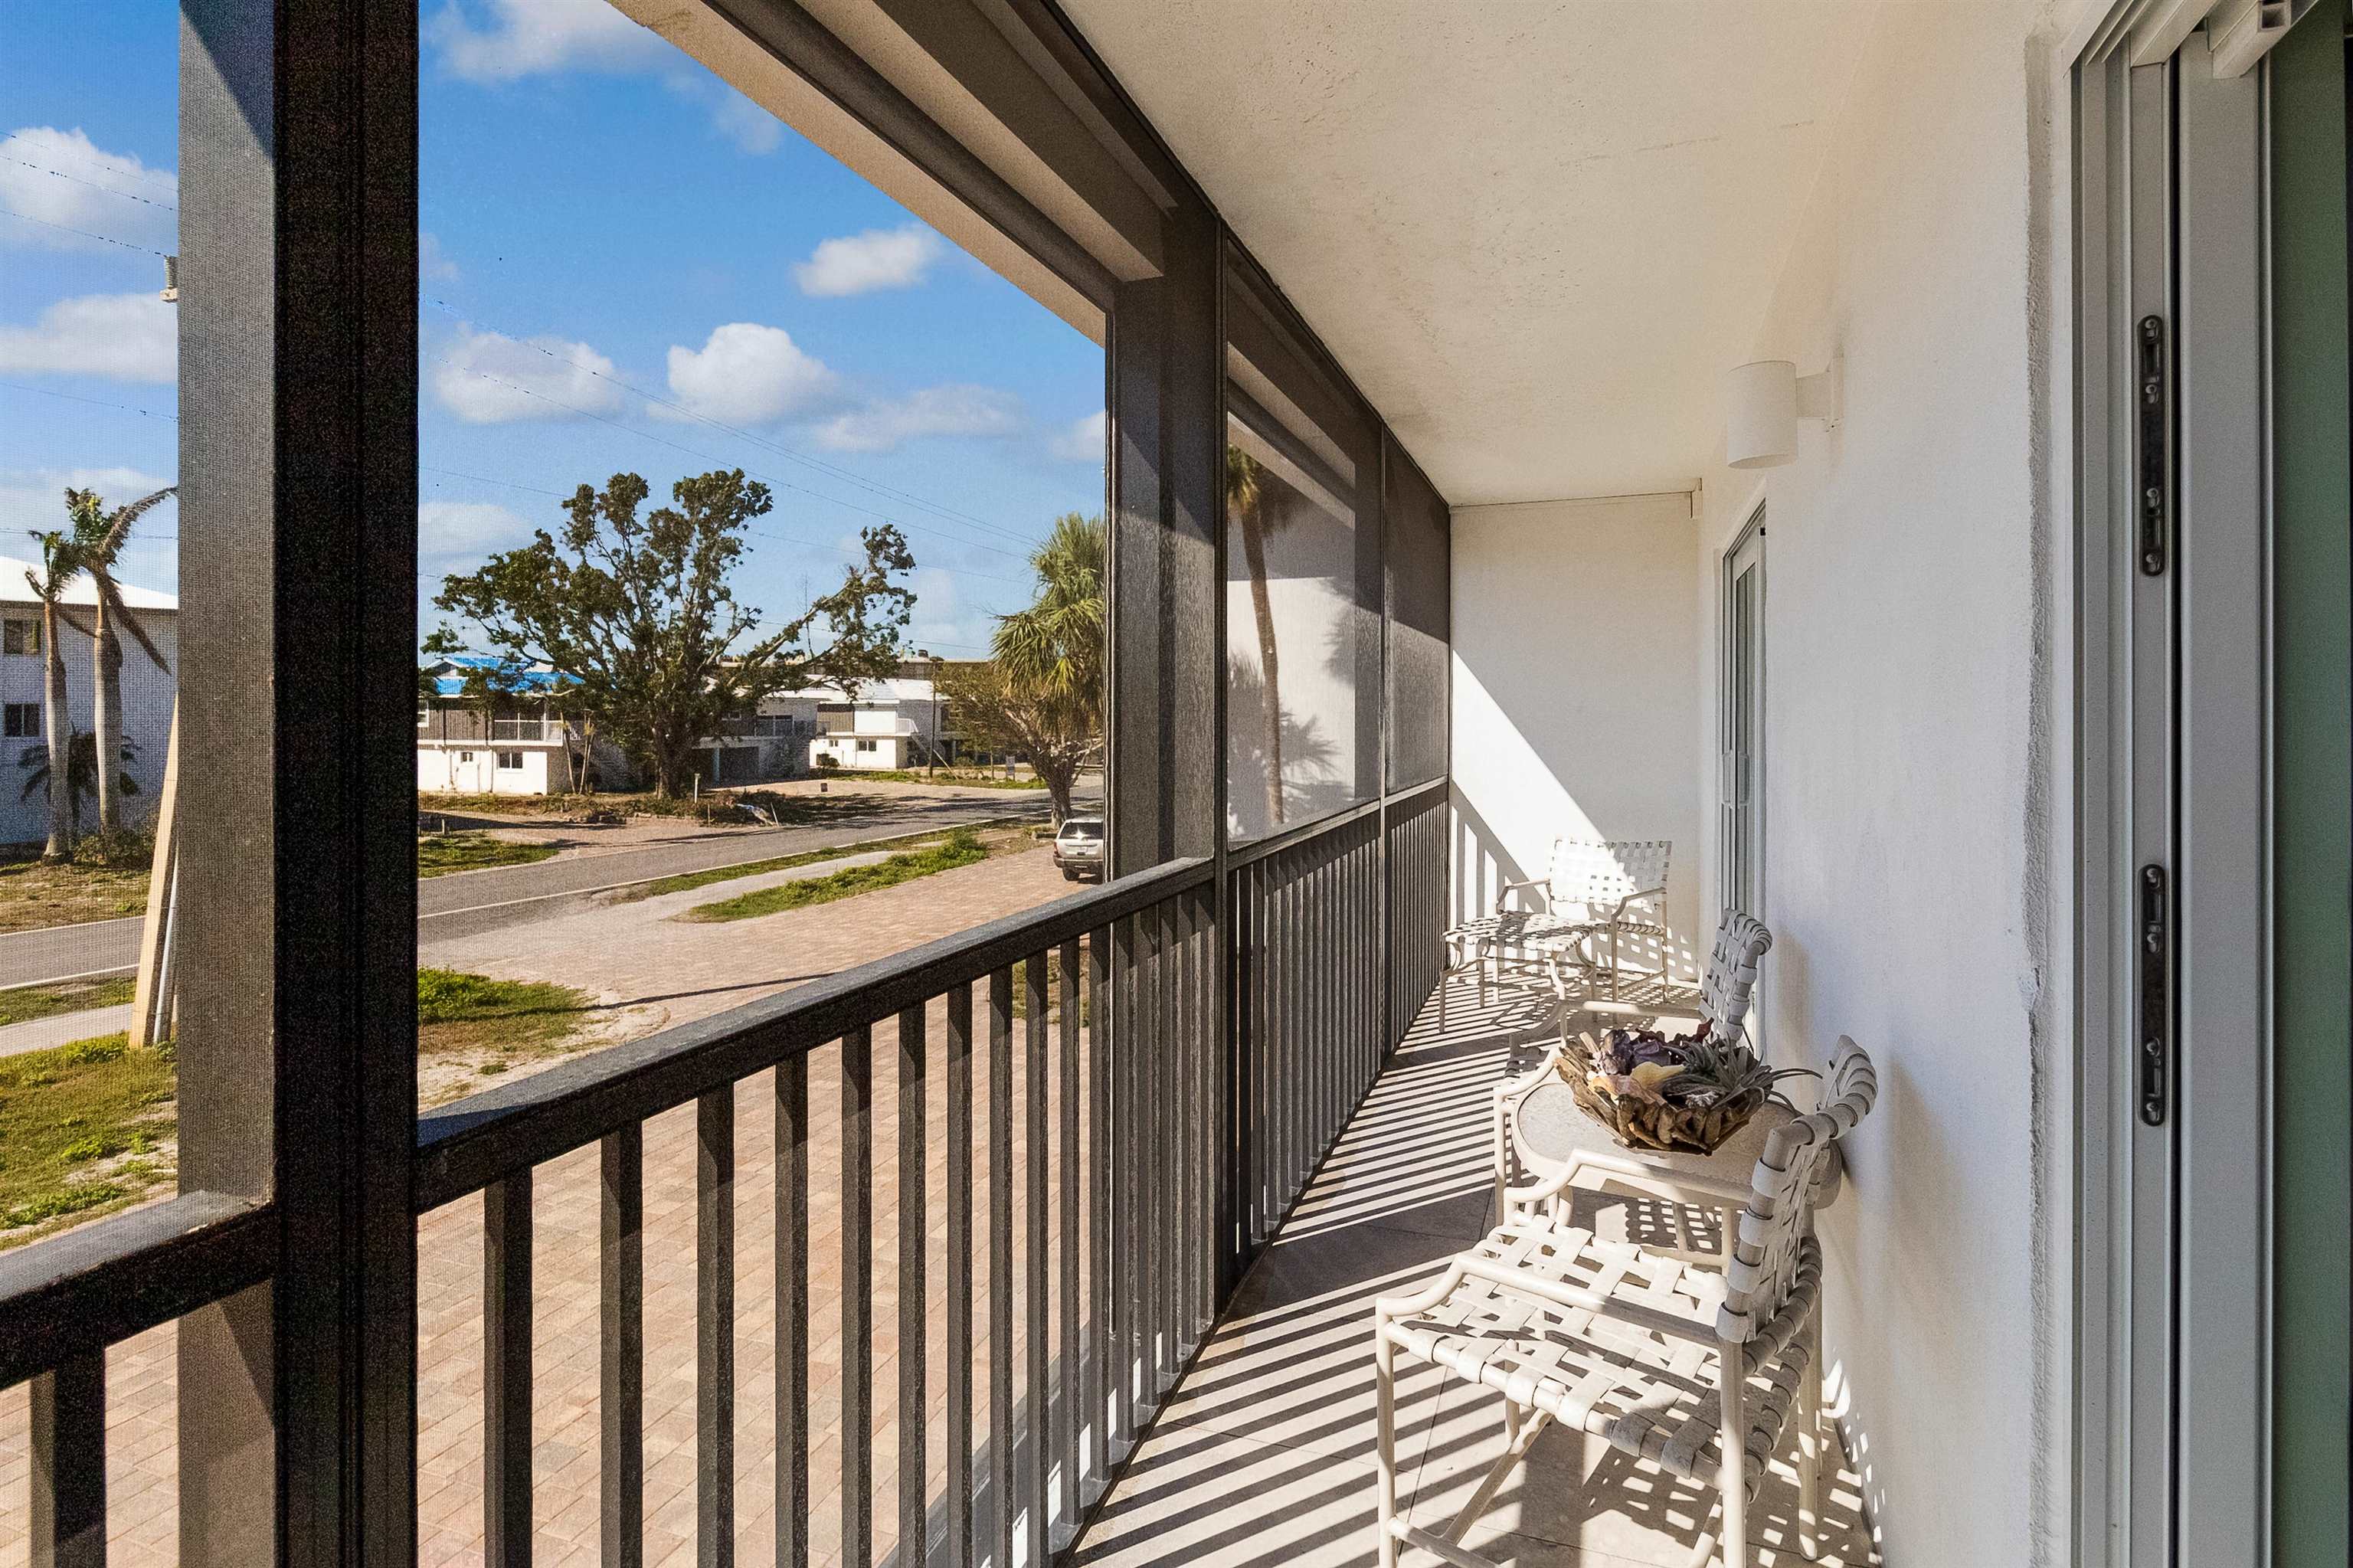 1340 Middle Gulf Drive, Sanibel, Florida 33957, 2 Bedrooms Bedrooms, ,2 BathroomsBathrooms,Condo,For Sale,Middle Gulf Drive,2230500